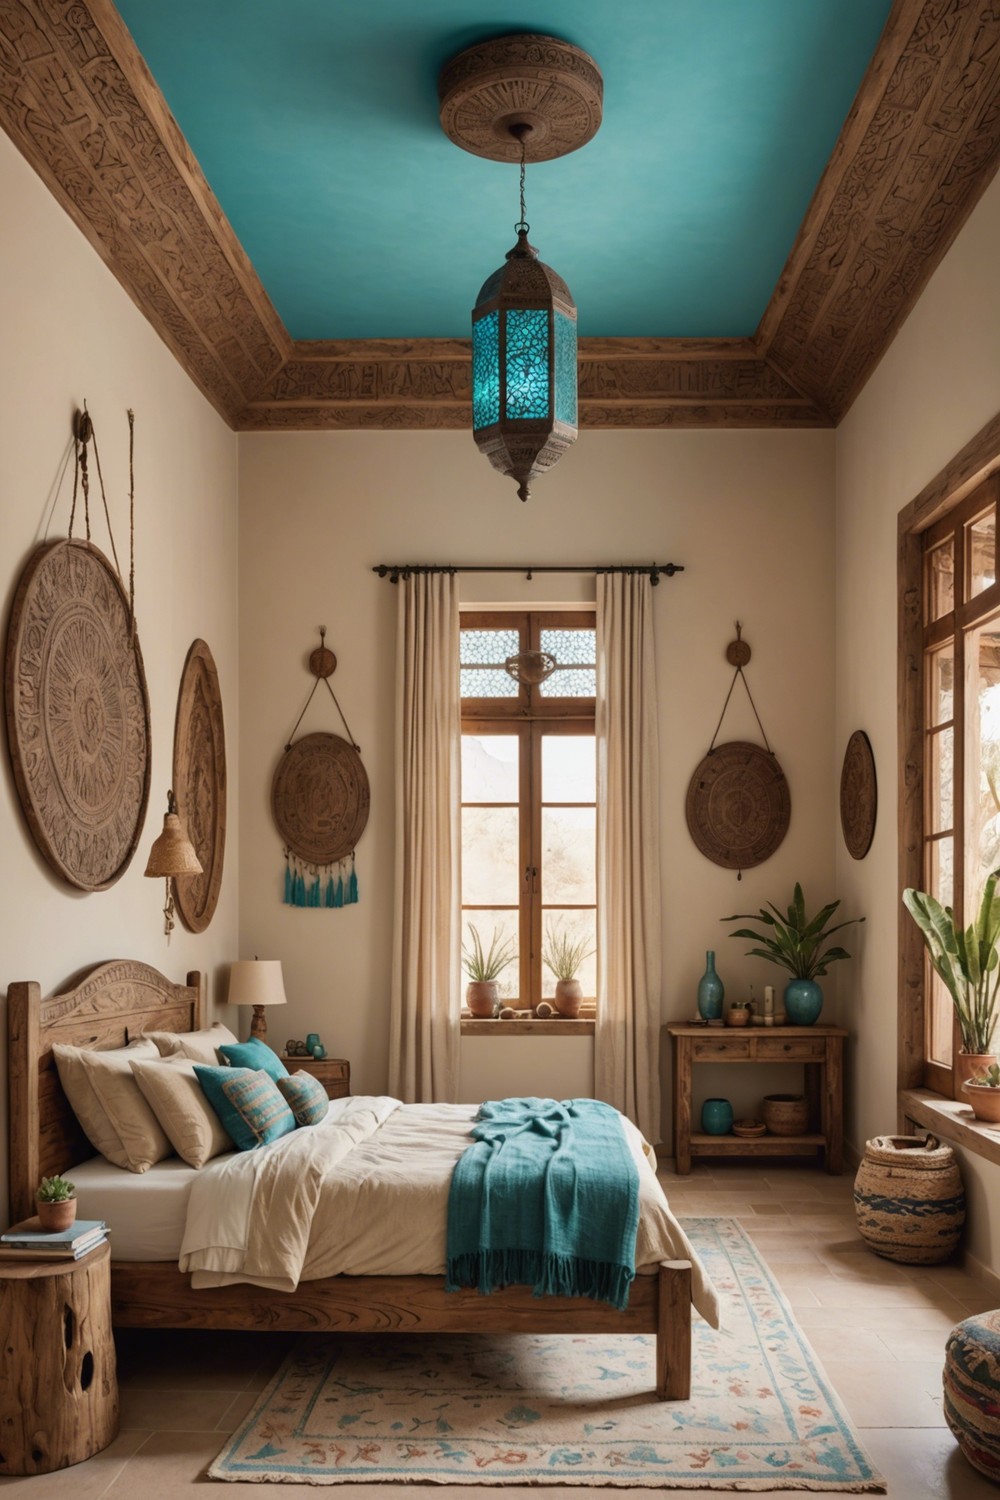 Southwestern Charm: Hanging Turquoise Pendants above a Rustic Bed